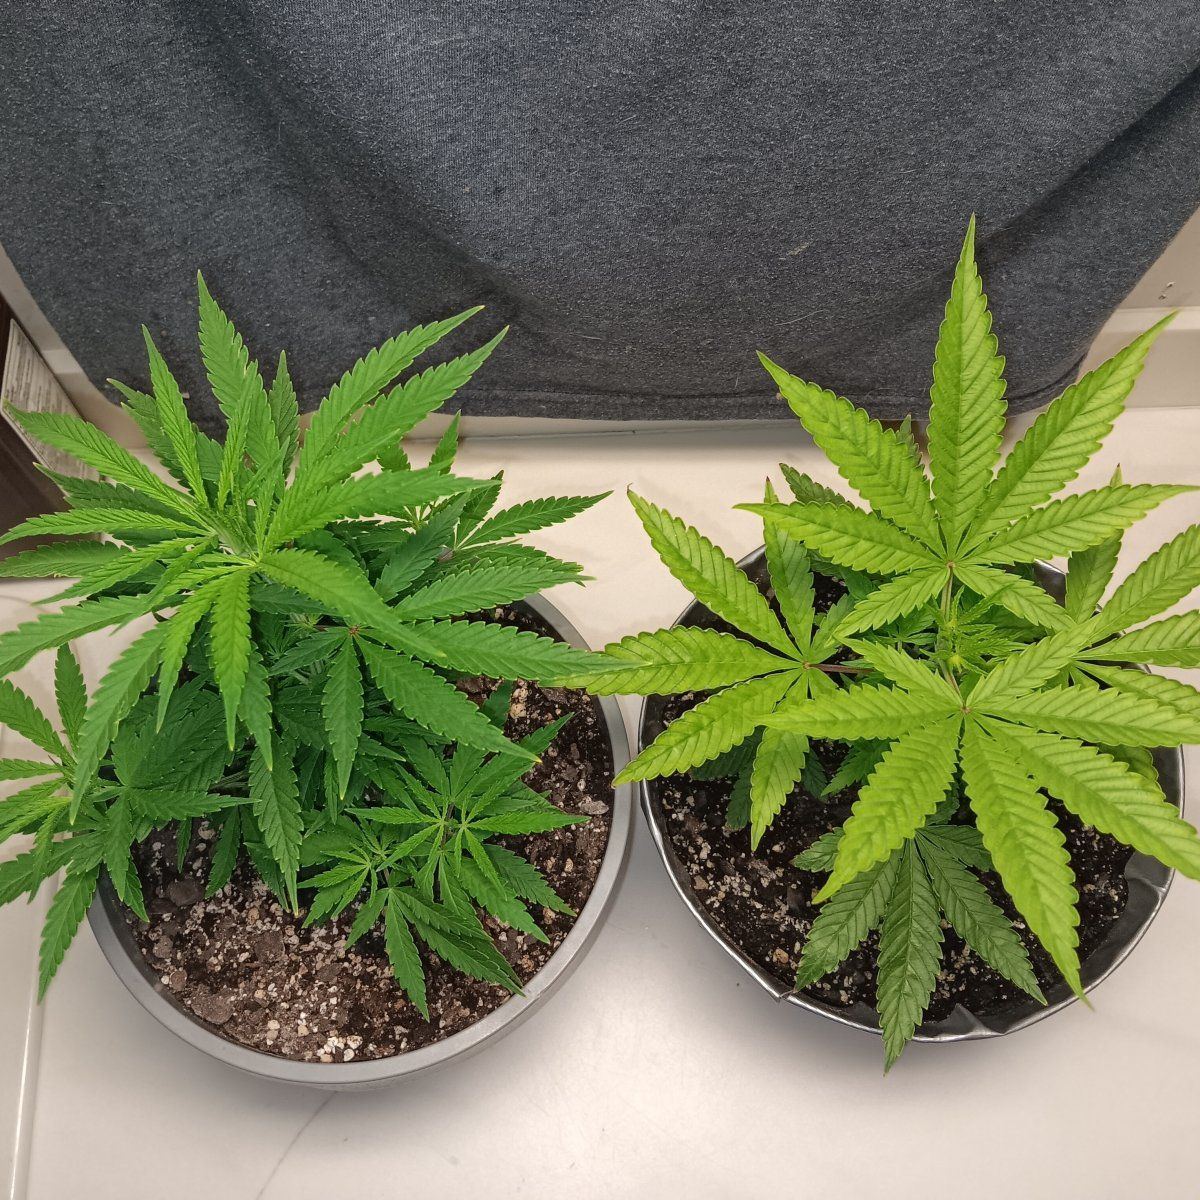 New growers question plants look too light in color on poor persons budget grow